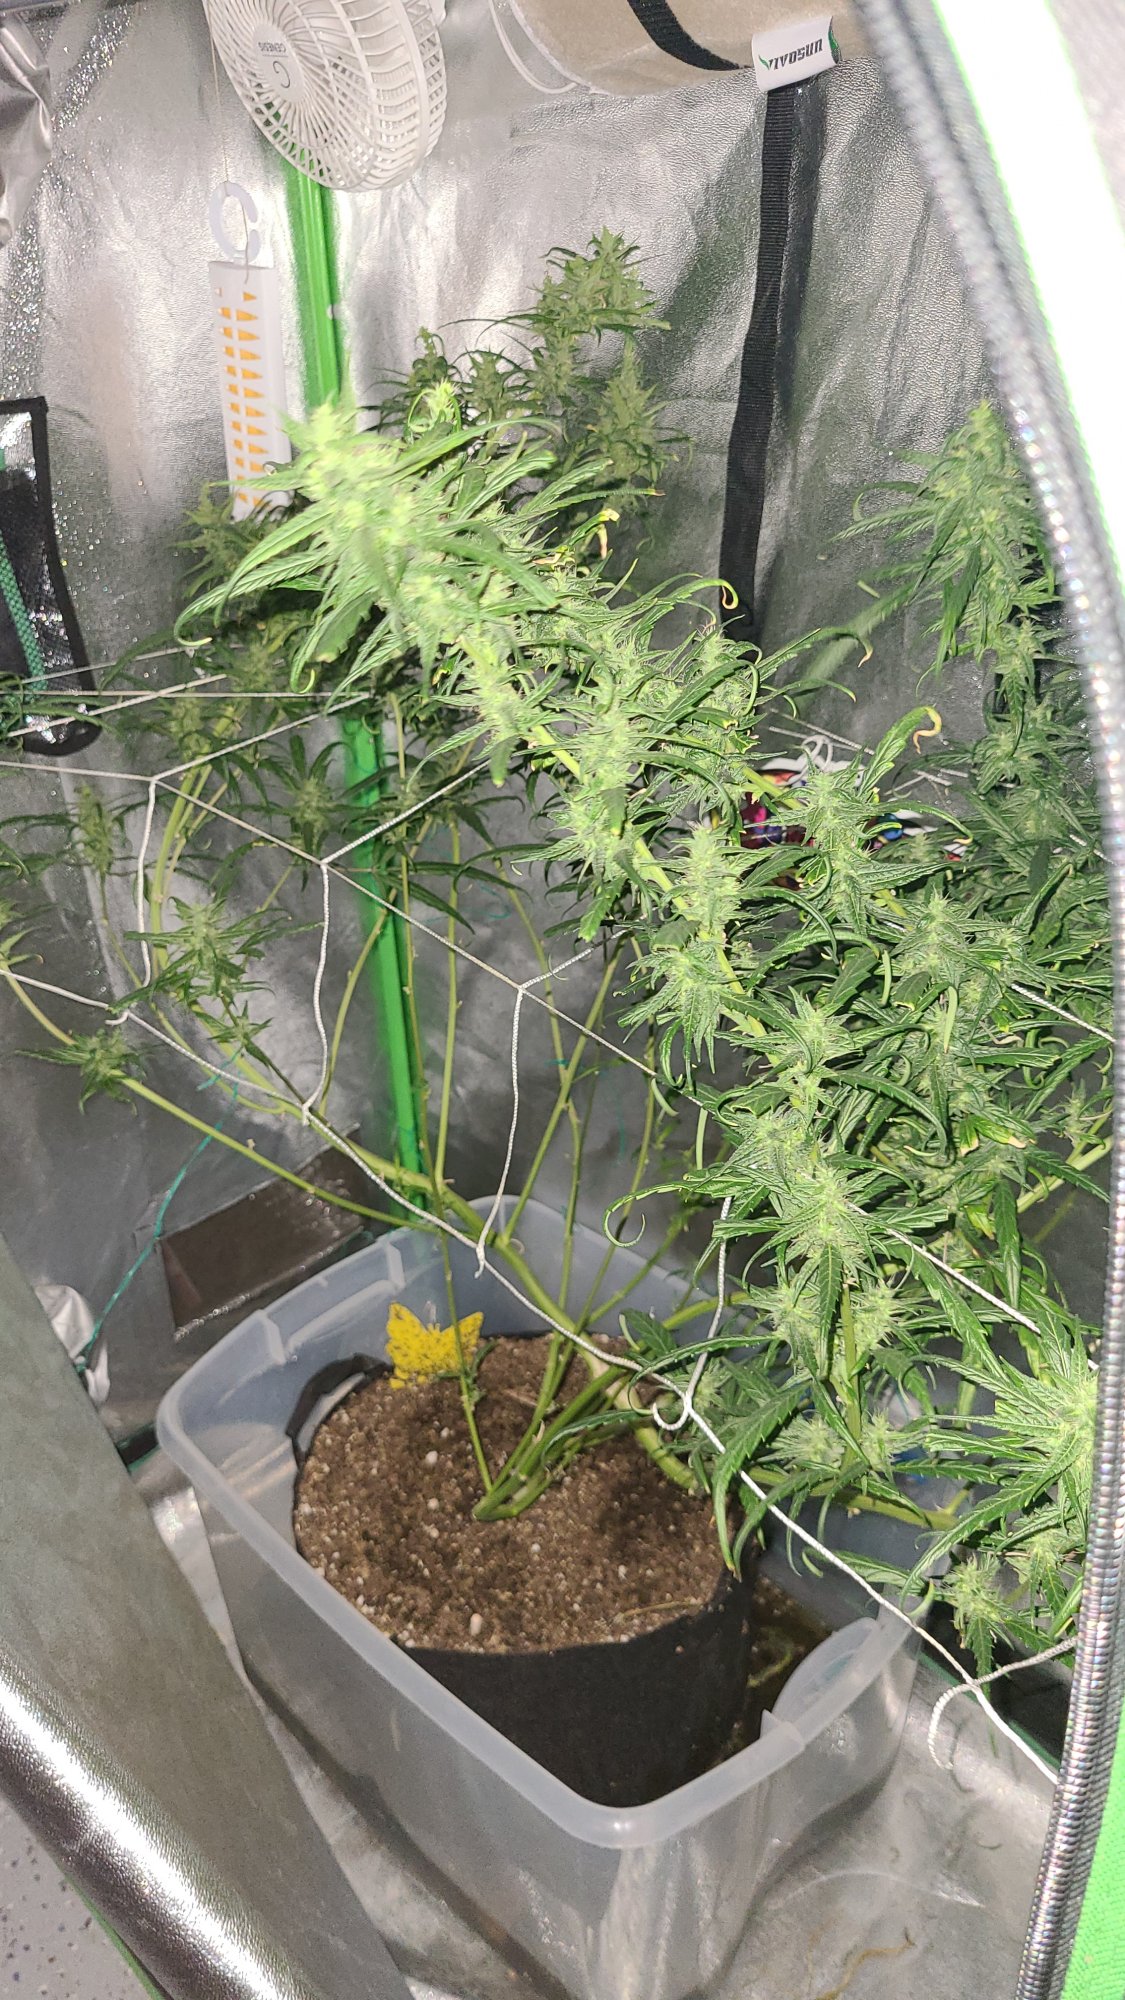 Thin curling leaves day 36 of flower